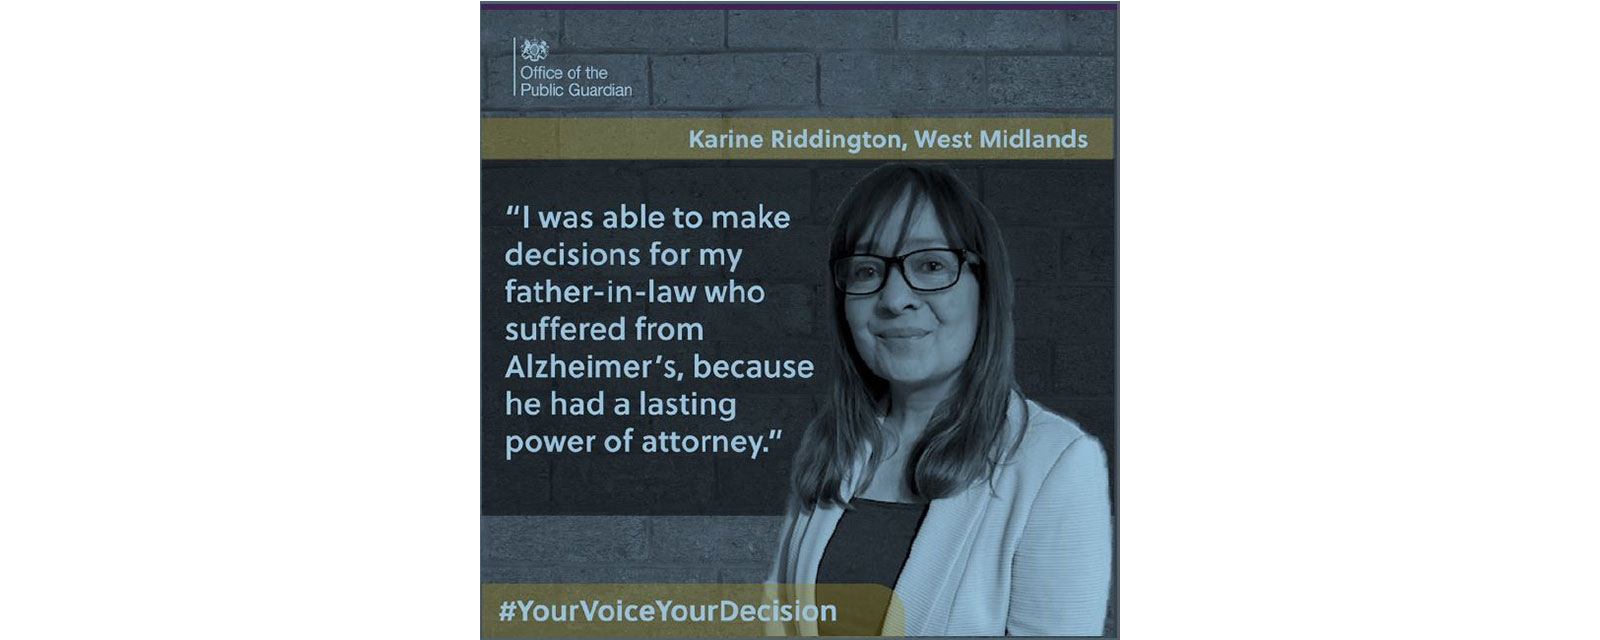 Your Voice Your Decision poster